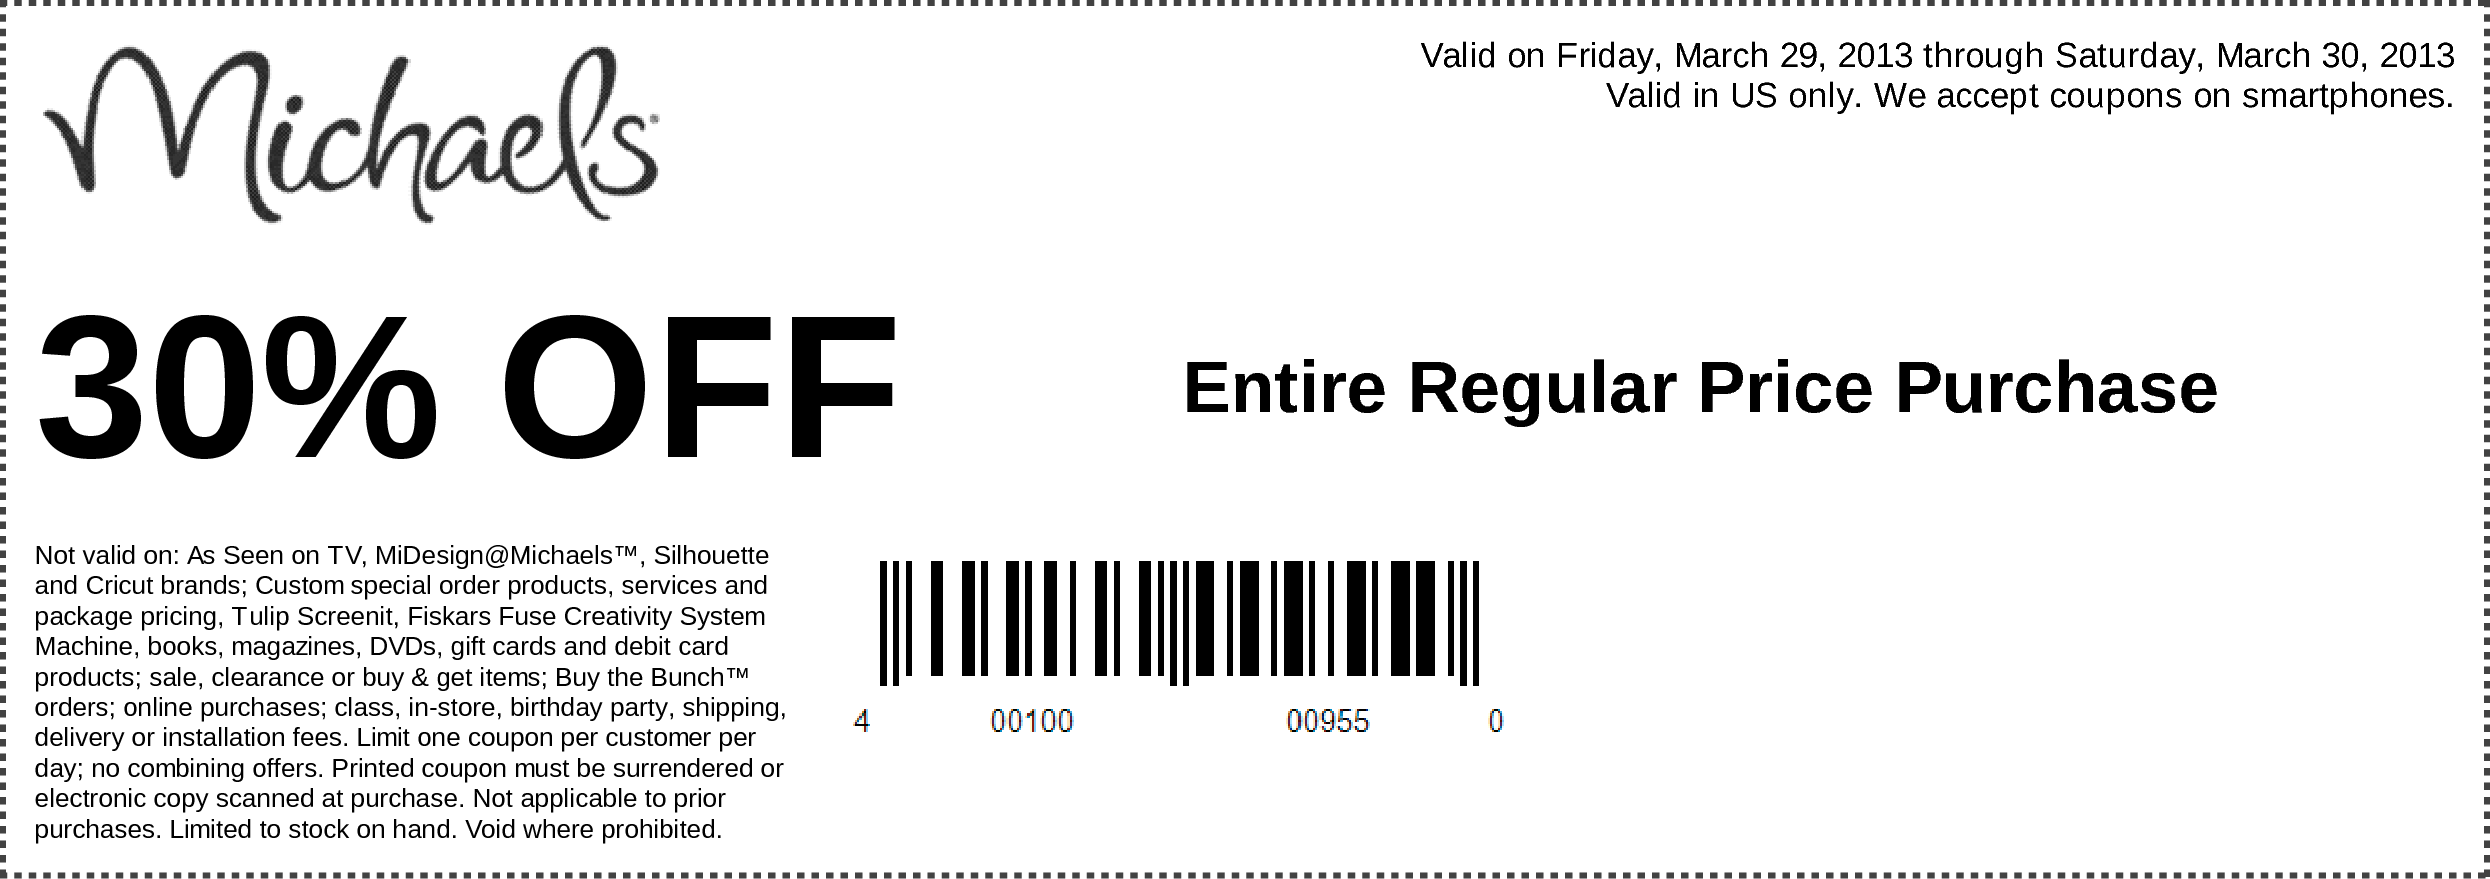 Kohls Coupons 2013 30 Off